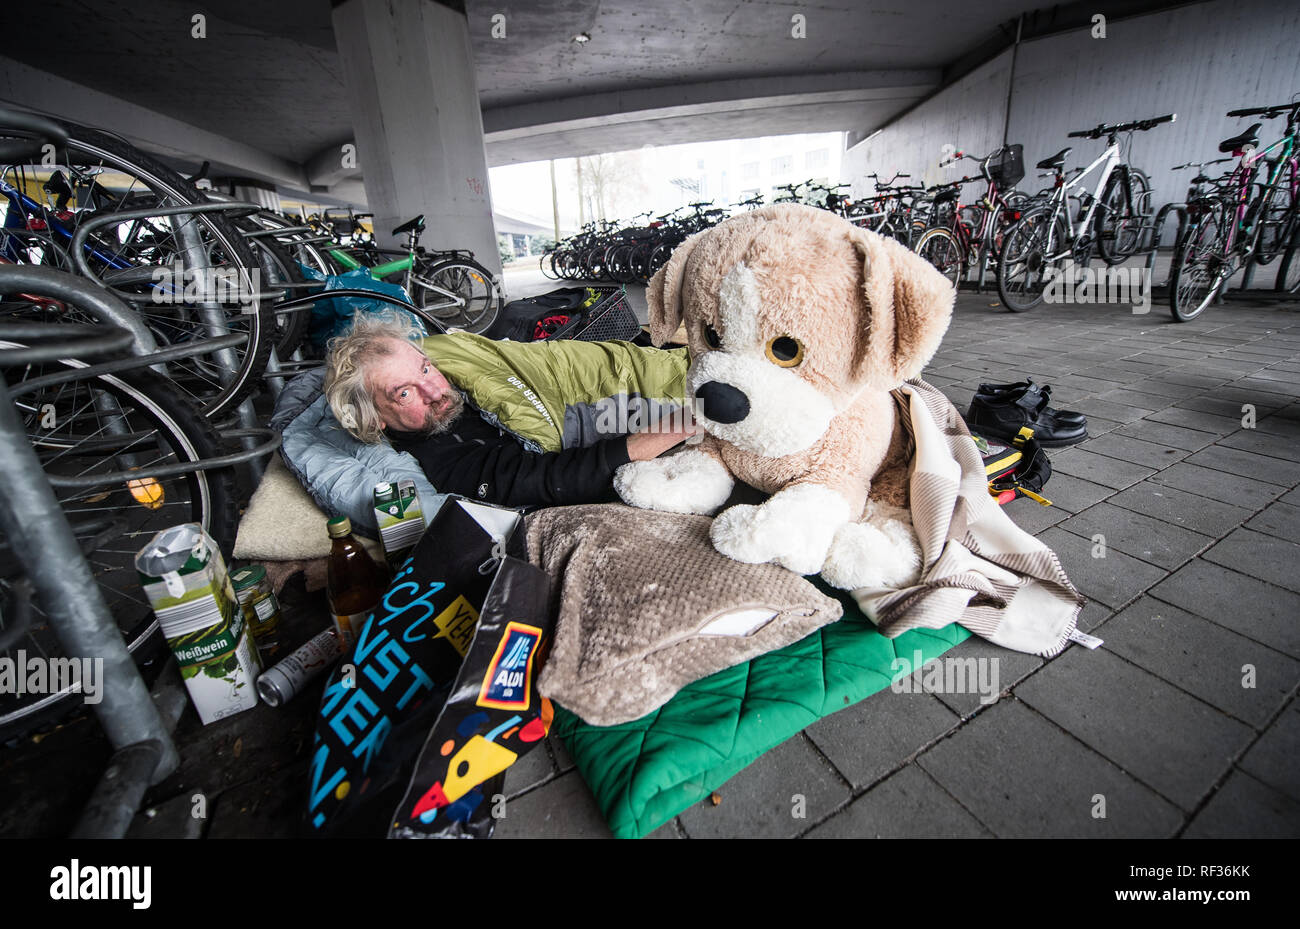 22 January 2019, Rhineland-Palatinate, Mainz: Paule (58), homeless and a self-confessed alcoholic, lies with a cloth dog 'Big Foot' under a bridge in the state capital. He prefers to sleep on the street, in the official accommodations there are always trouble, fights, alcohol problems and thefts. Over the winter, the city of Mainz has set up residential containers for the homeless at Fort Hauptstein near the main railway station. The Evangelische Wohnungslosenhilfe Mainz looks after the offer. (to dpa 'One night outdoors can be life-threatening in frost' from 24.01.201) Photo: Andreas Arnold Stock Photo